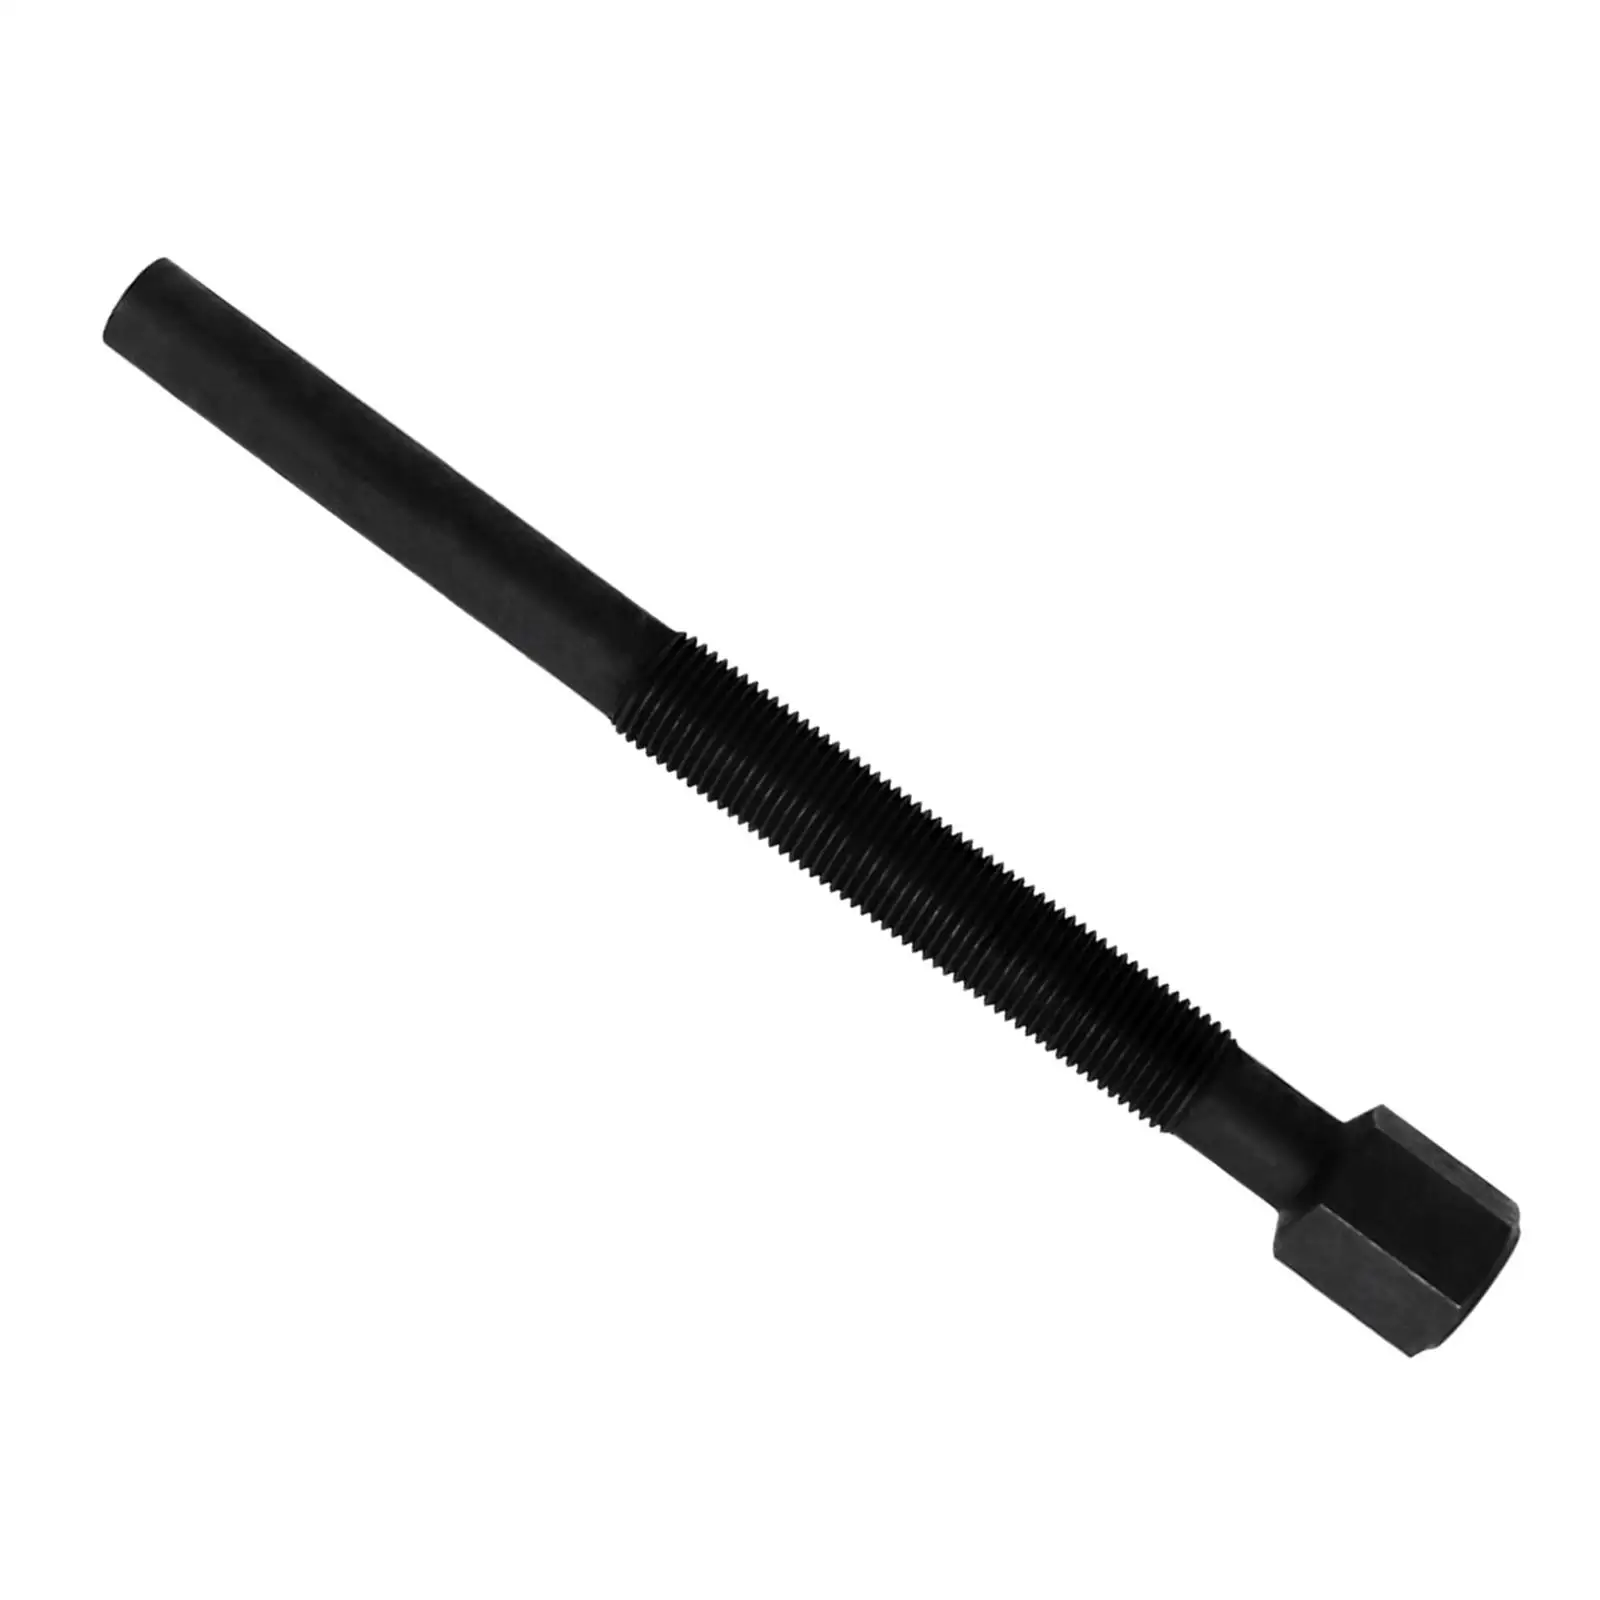 Clutch Puller Removal Tool Portable Black Sturdy Simple to Use Accessory Jdg1641 for John Deere Gators Direct Replace Durable